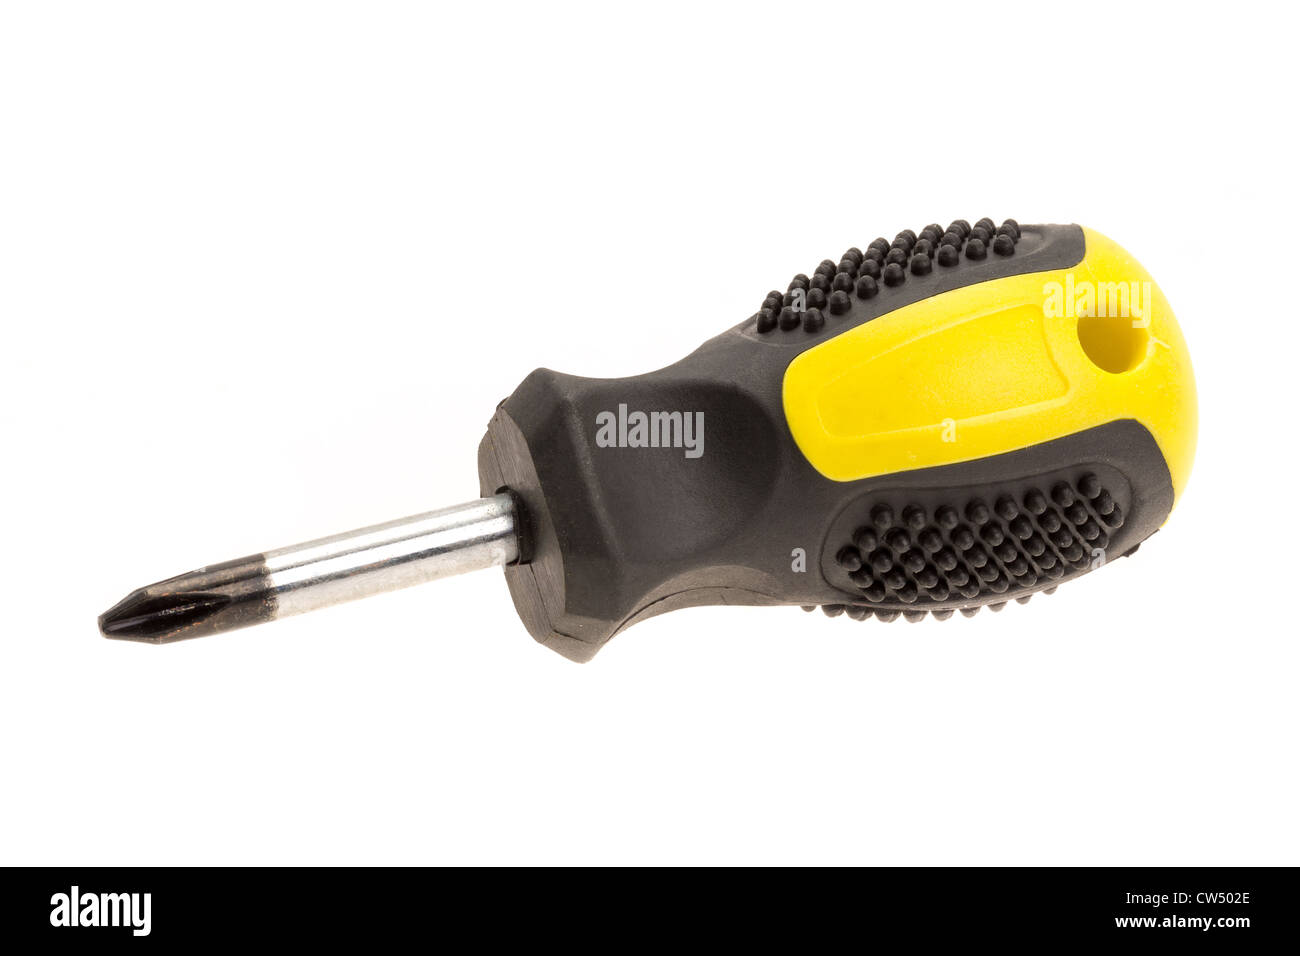 Small screwdriver with a Phillips cross head - studio shot with a white background Stock Photo